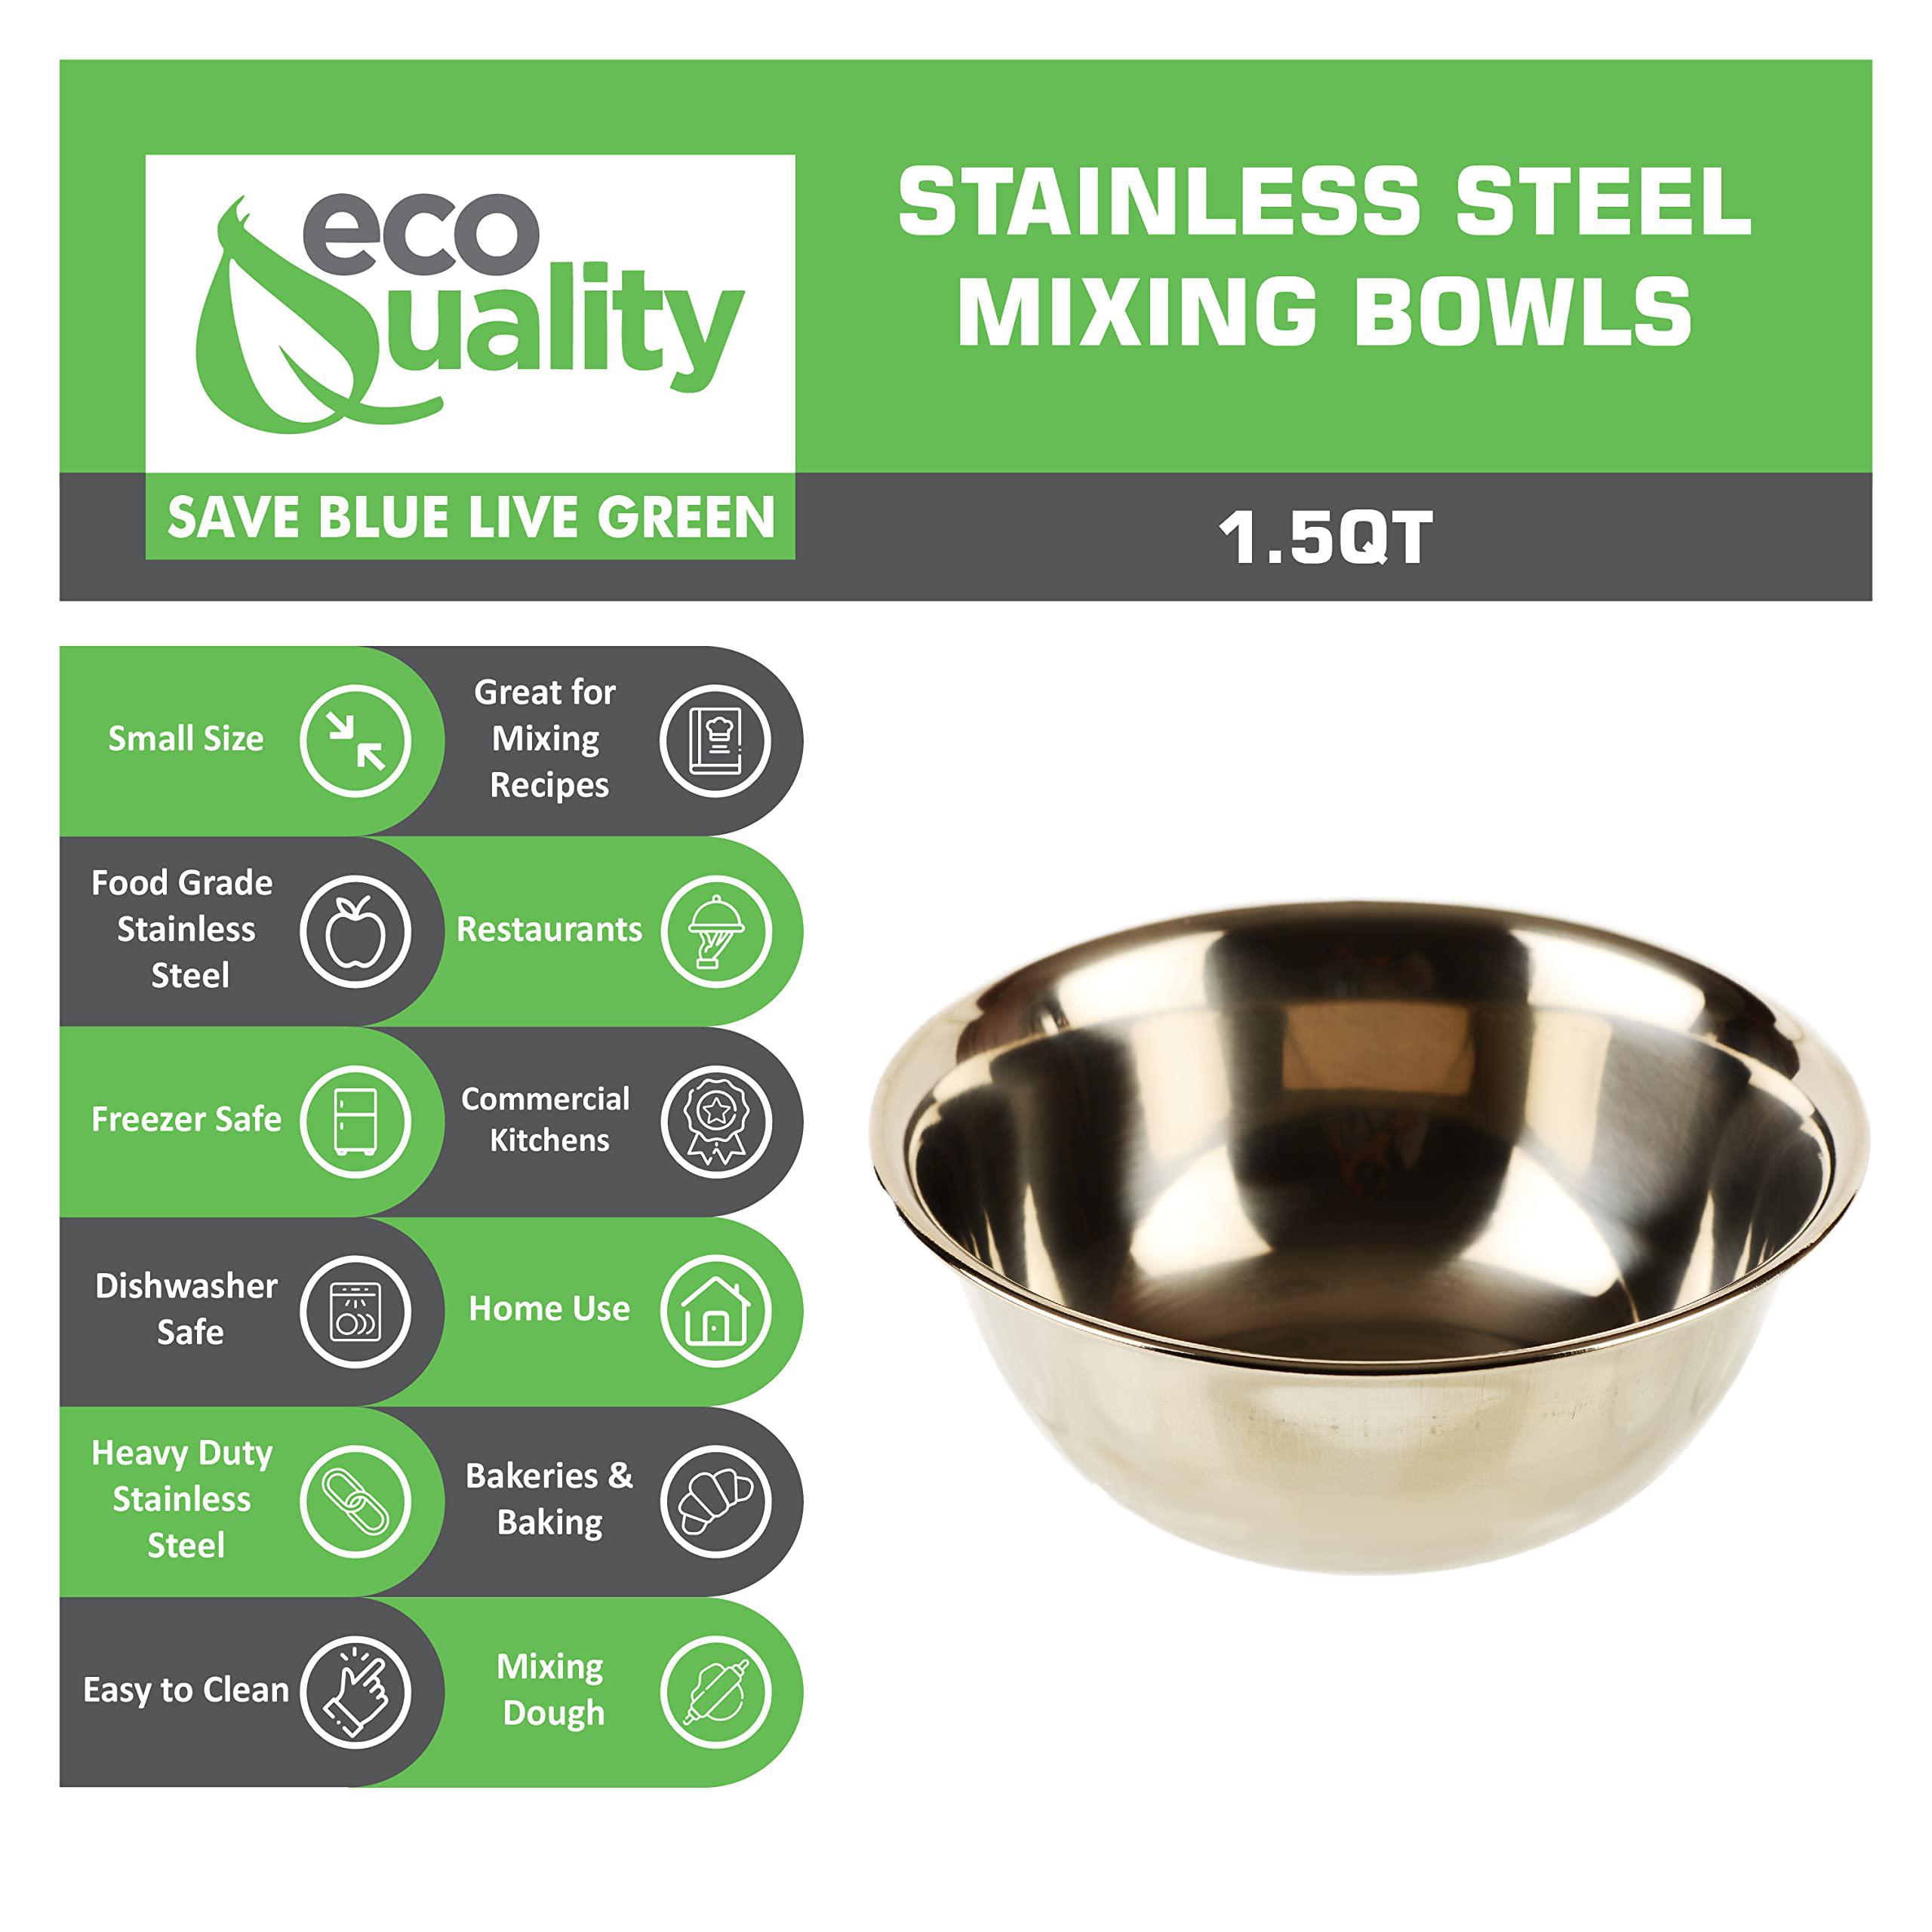 ecoquality [1 pack] 1.5 quart small stainless steel mixing bowl - baking bowl, flat base bowl, preparation bowls - great for 